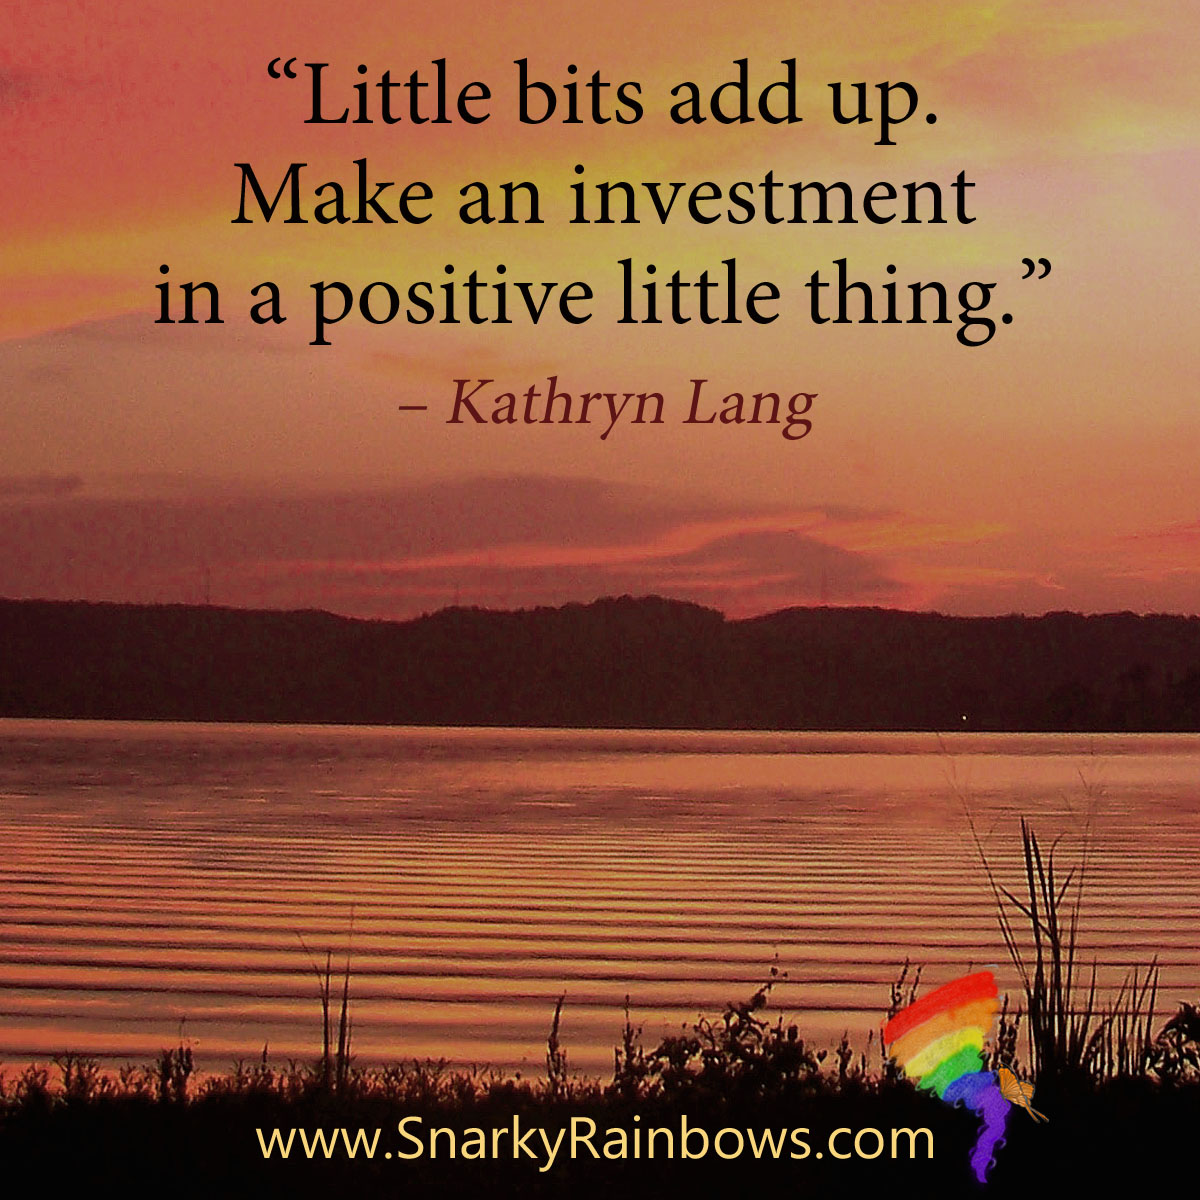 #QuoteoftheDay - little bits add up